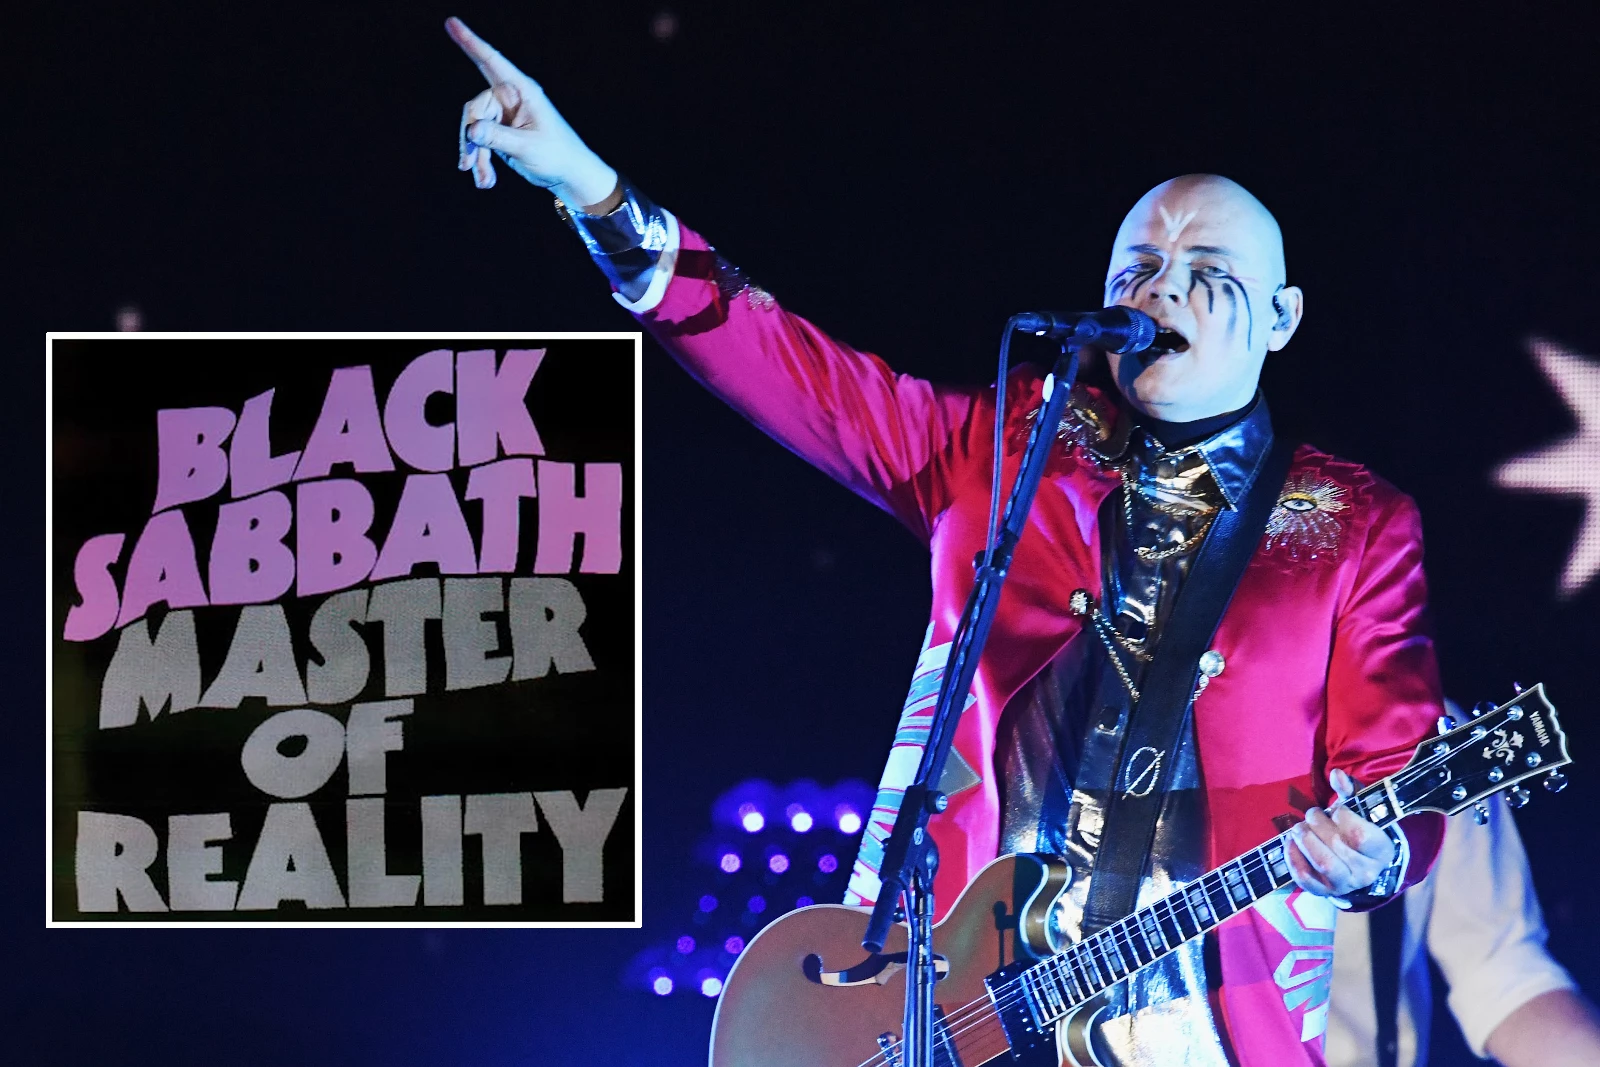 Billy Corgan on Black Sabbath: 'This Is What God Sounds Like'